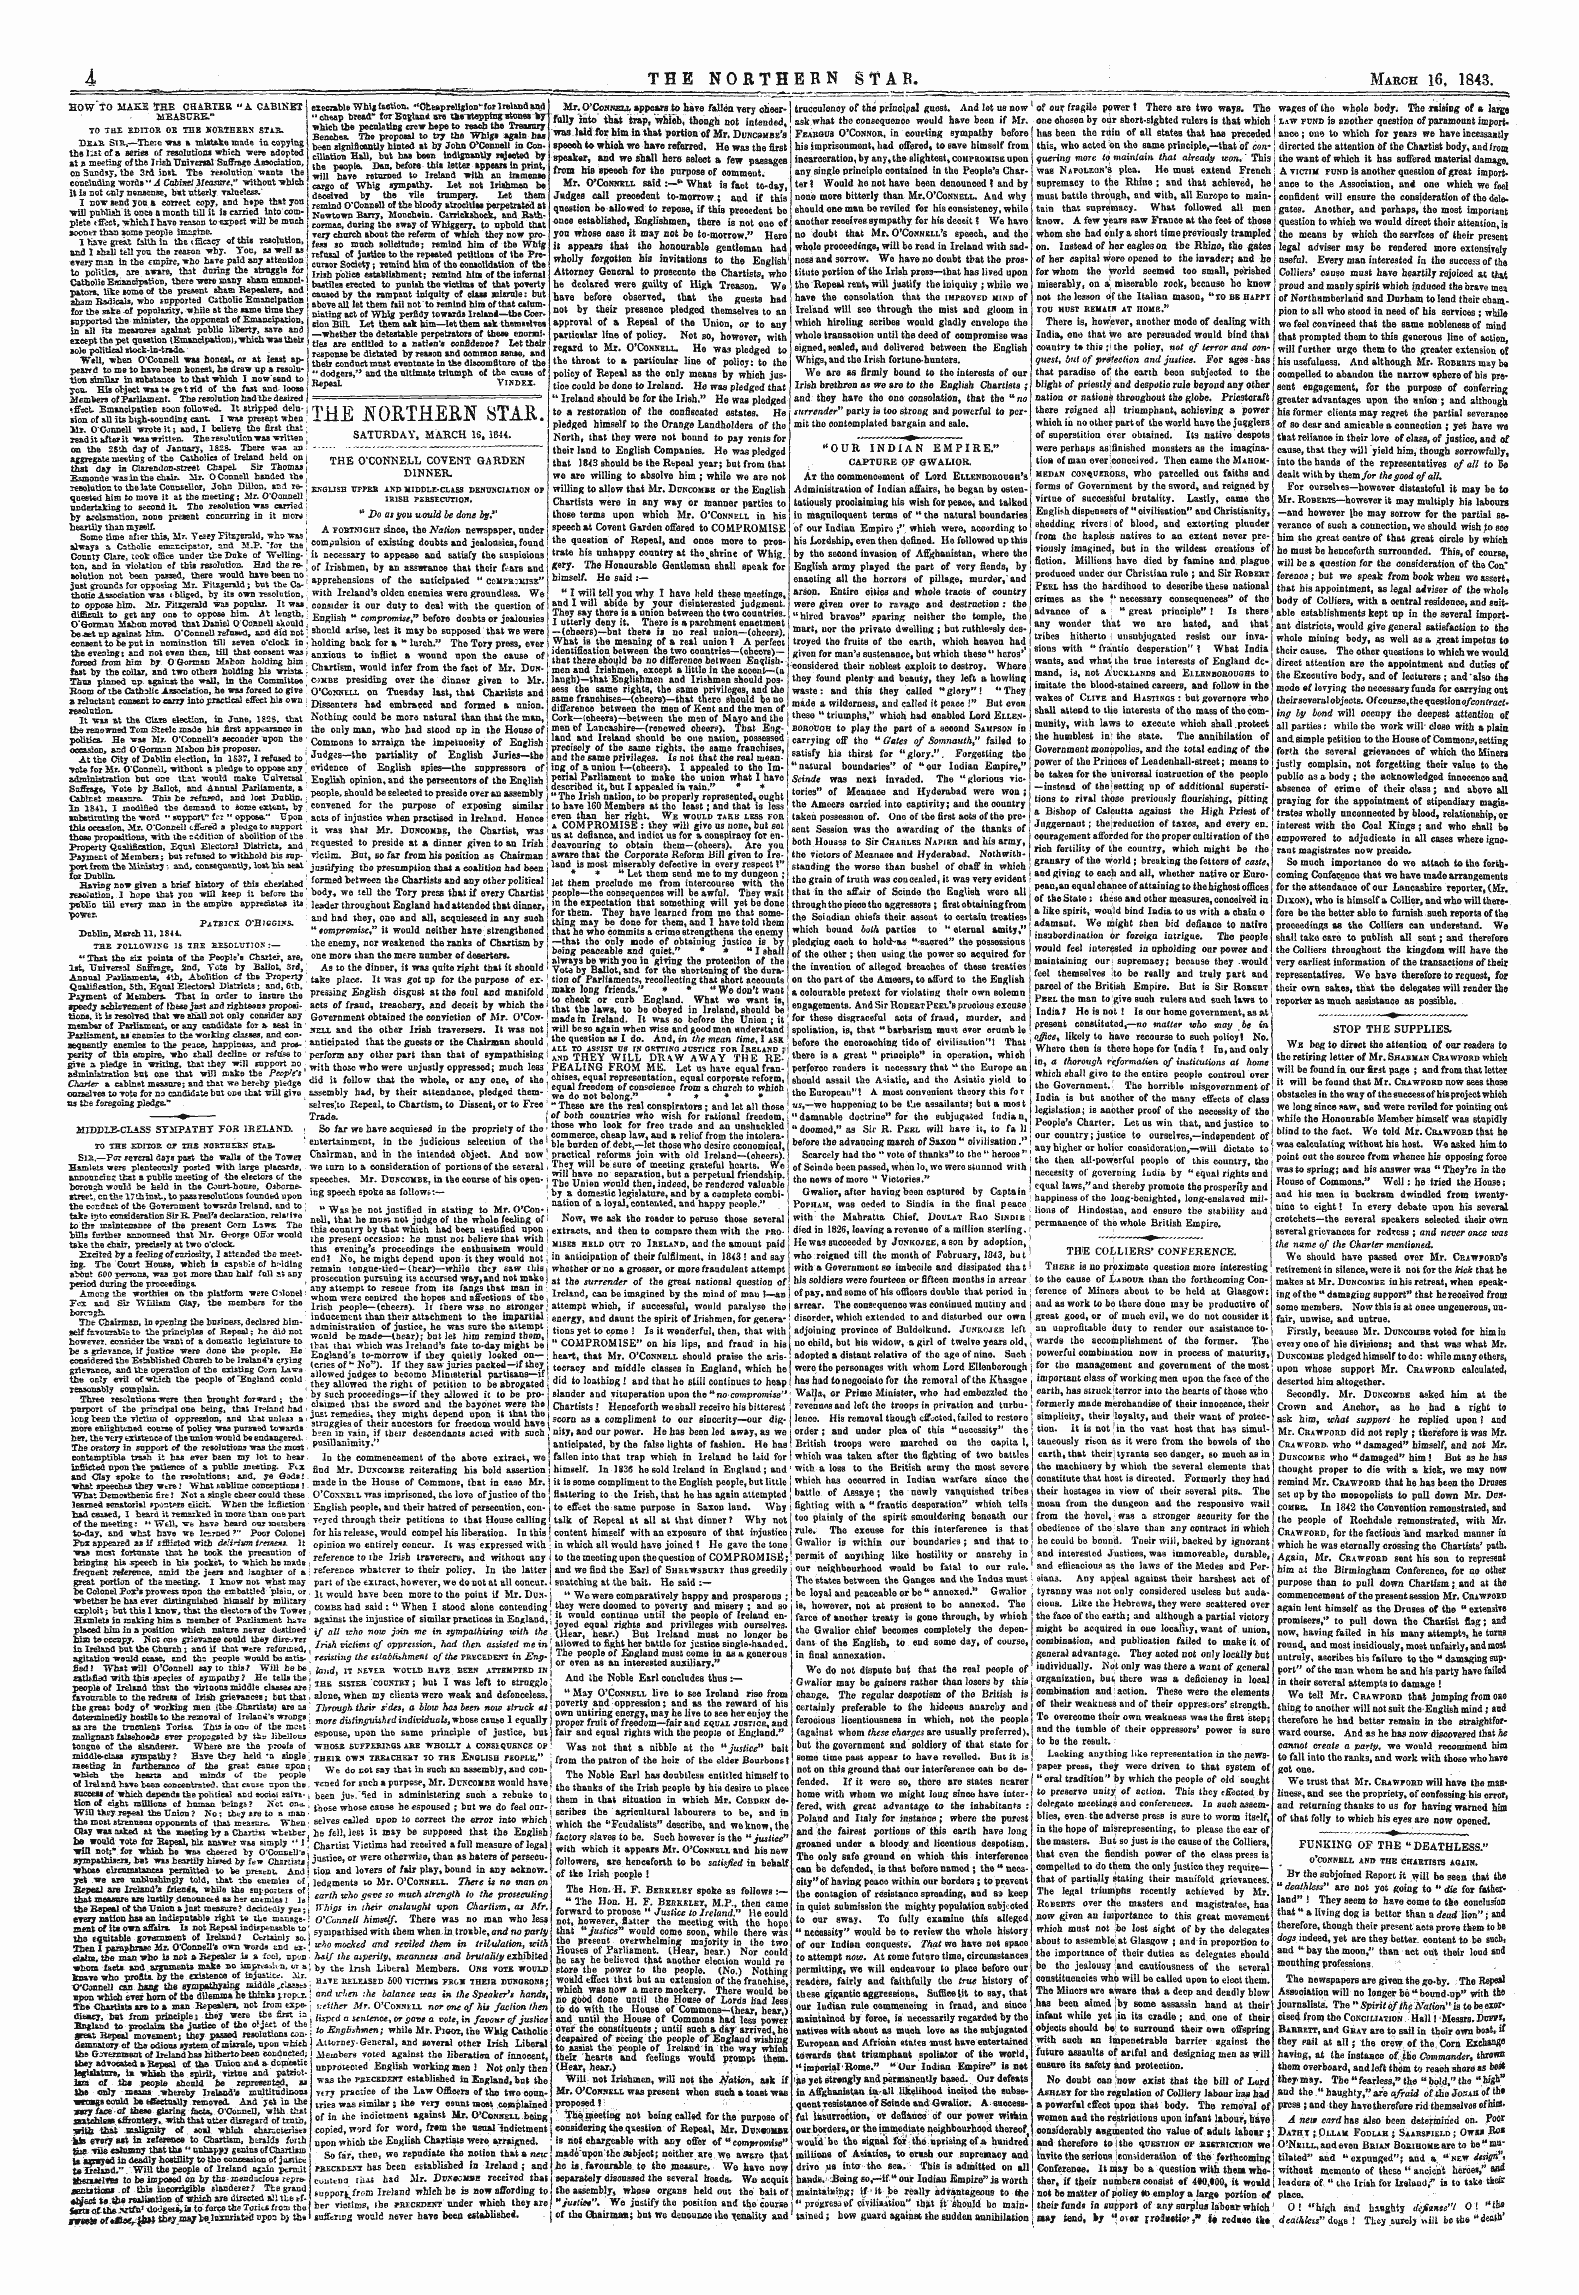 Northern Star (1837-1852): jS F Y, 1st edition - The 50ethern Stae. Saturday, March 16, 1844.